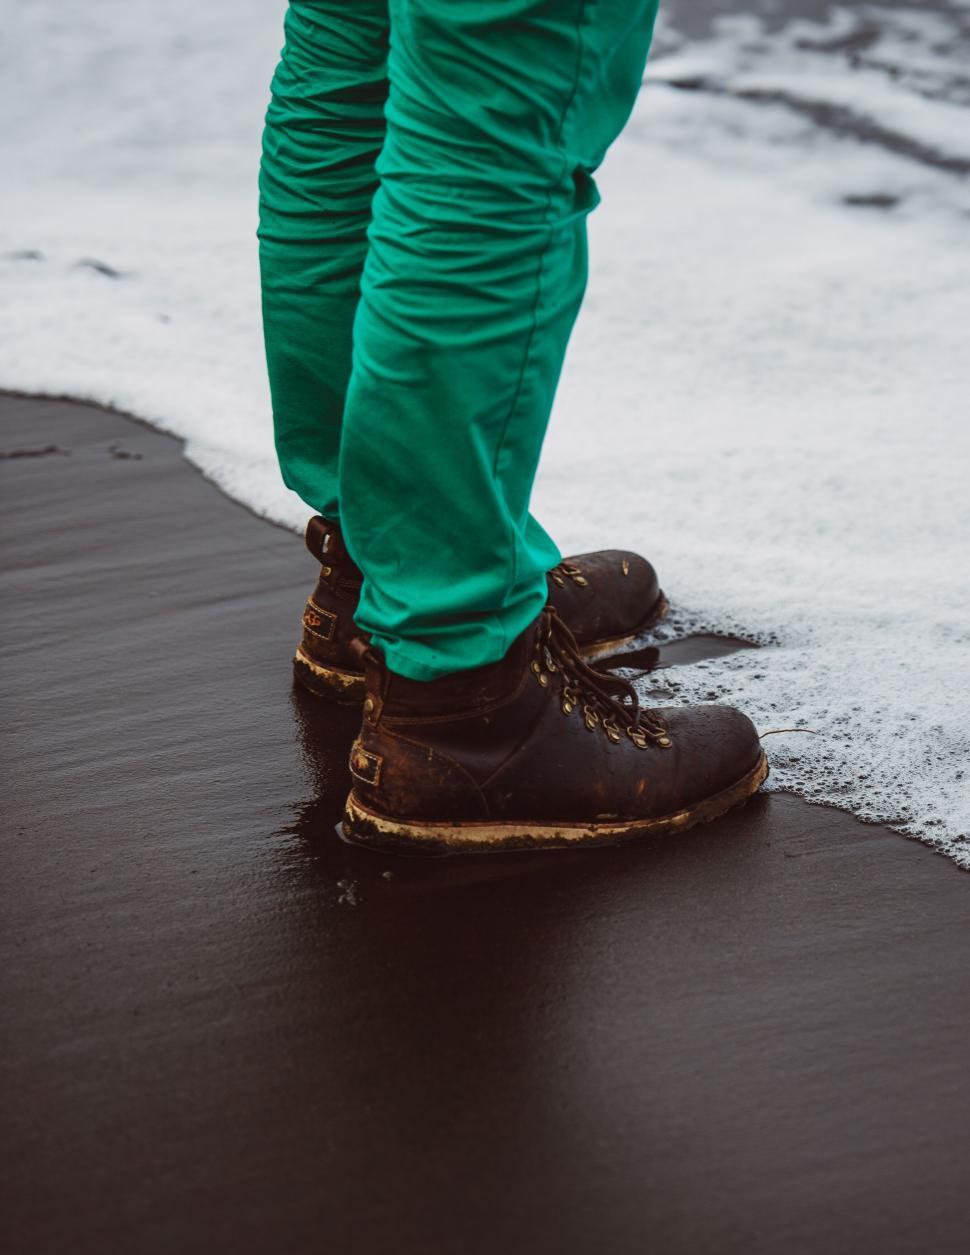 Free Image of Person walking on icy path in green pants 